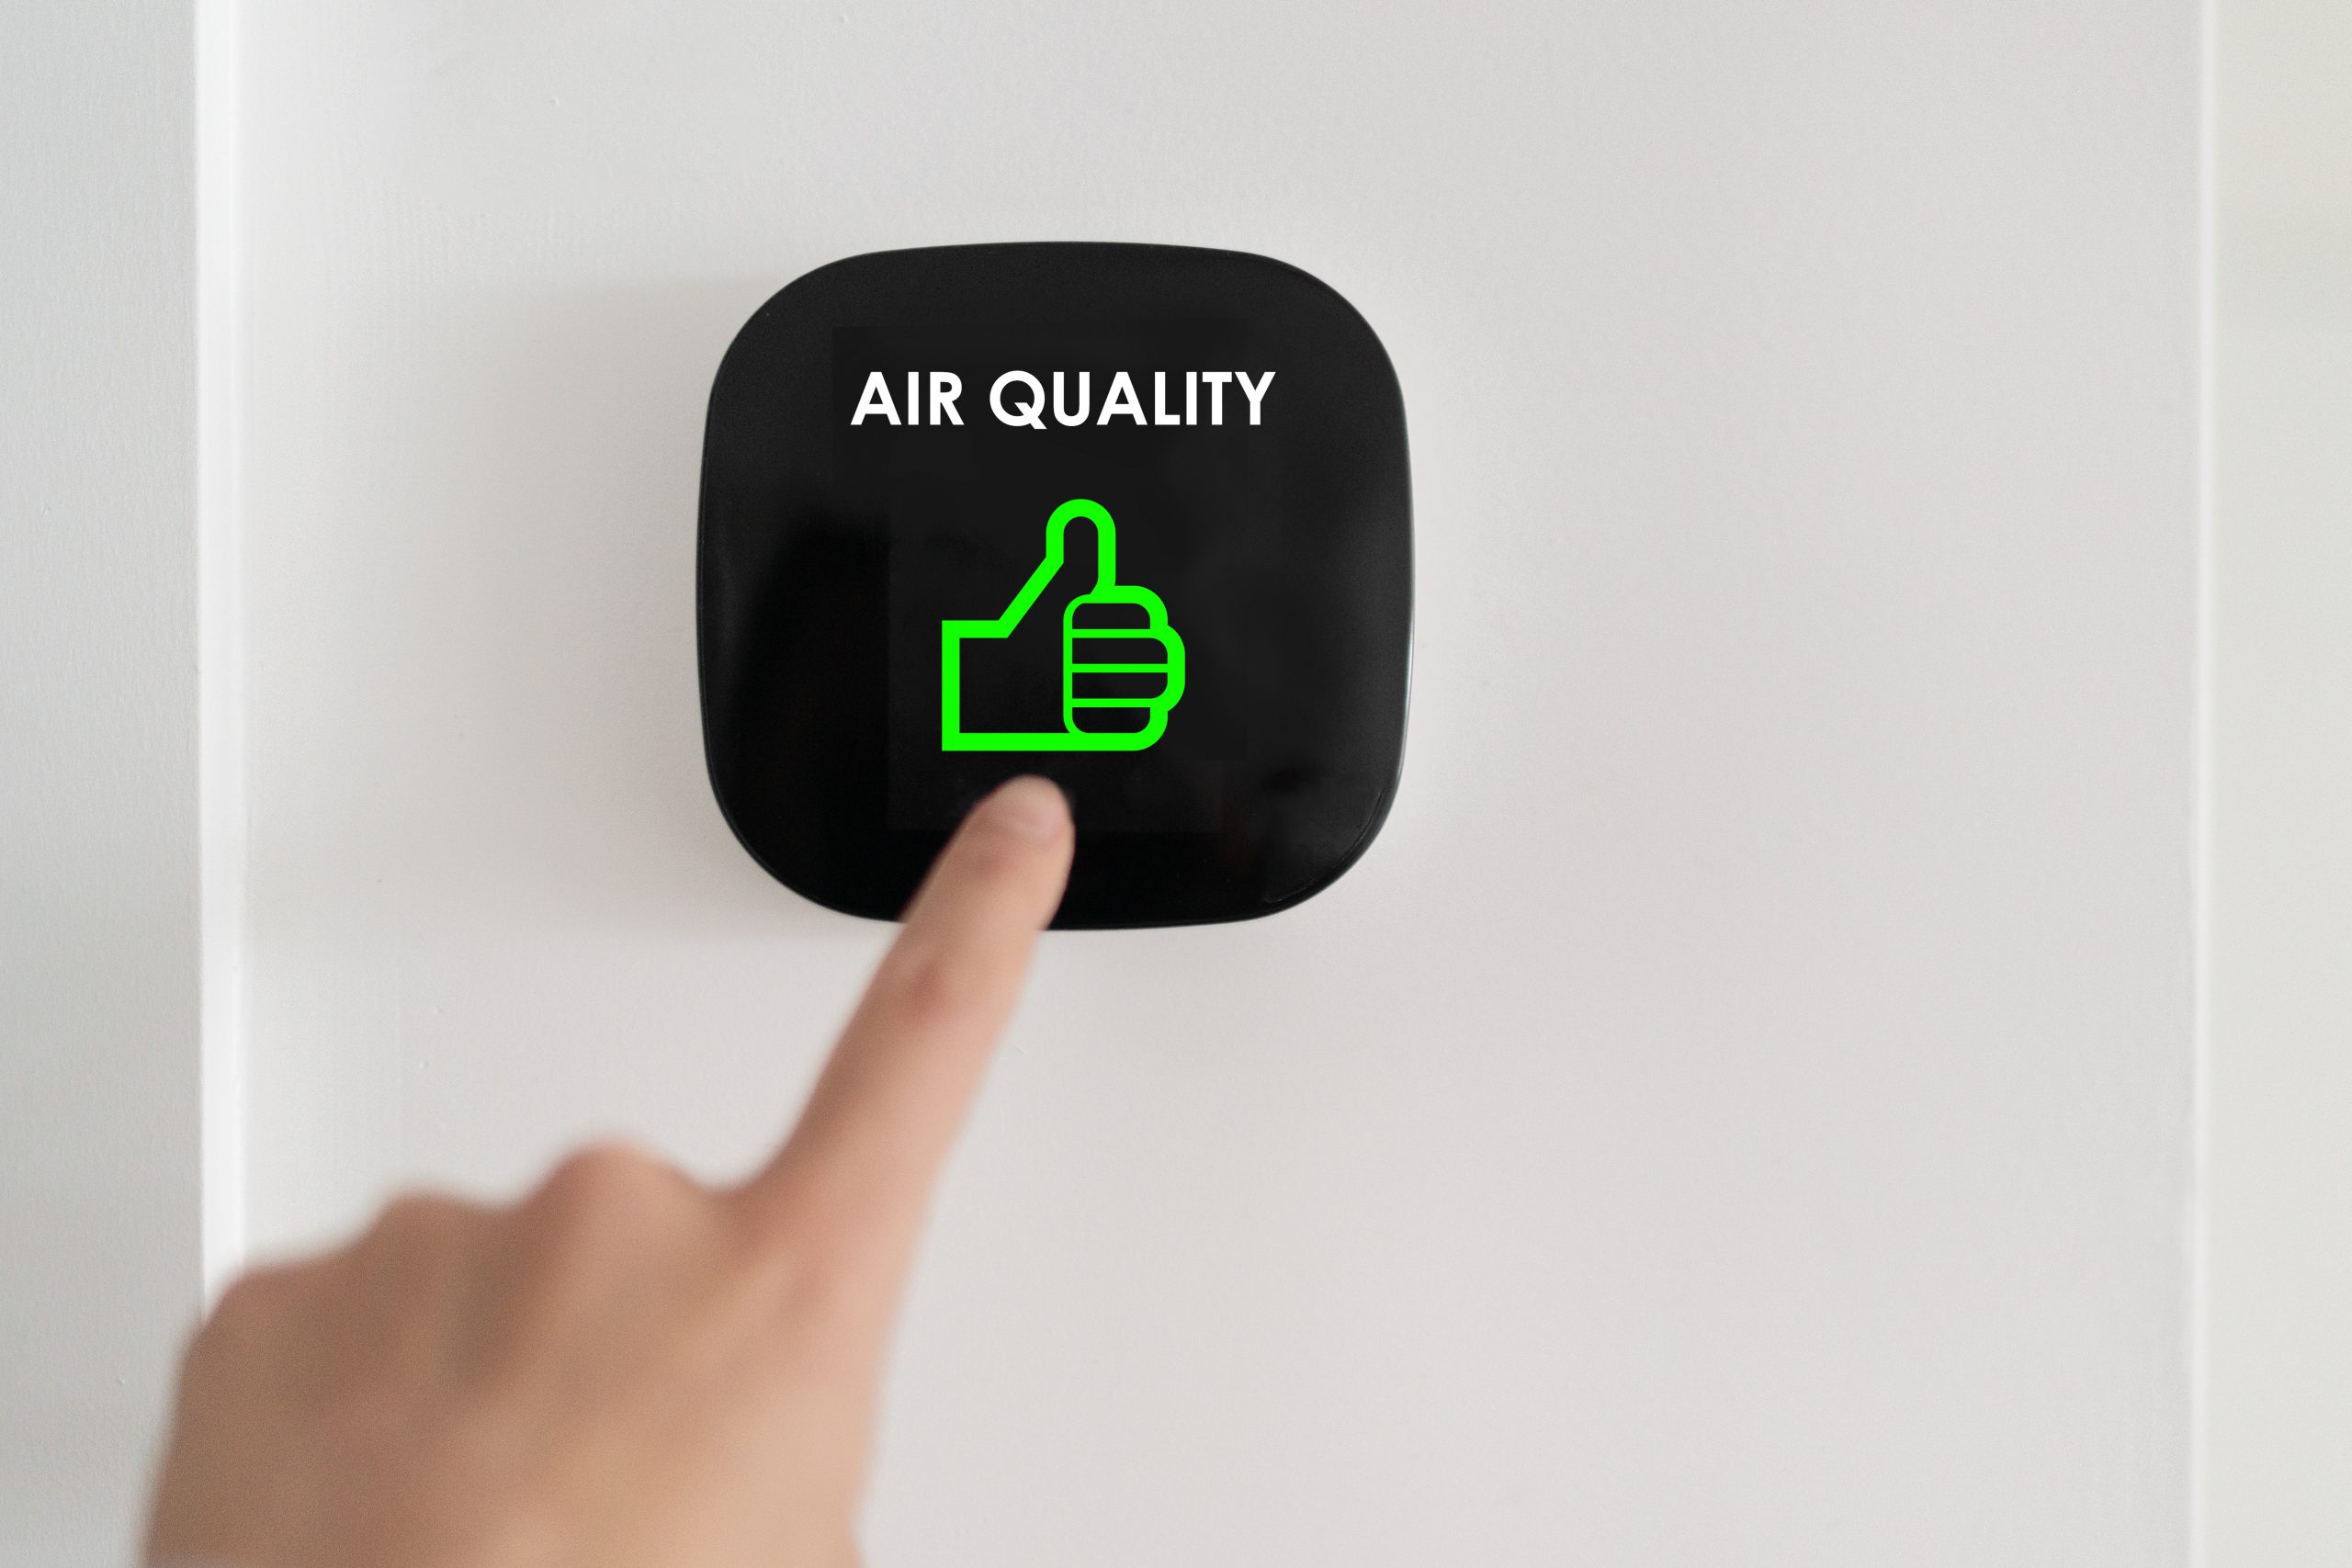 How do These New Sensors Improve Indoor Air Quality?